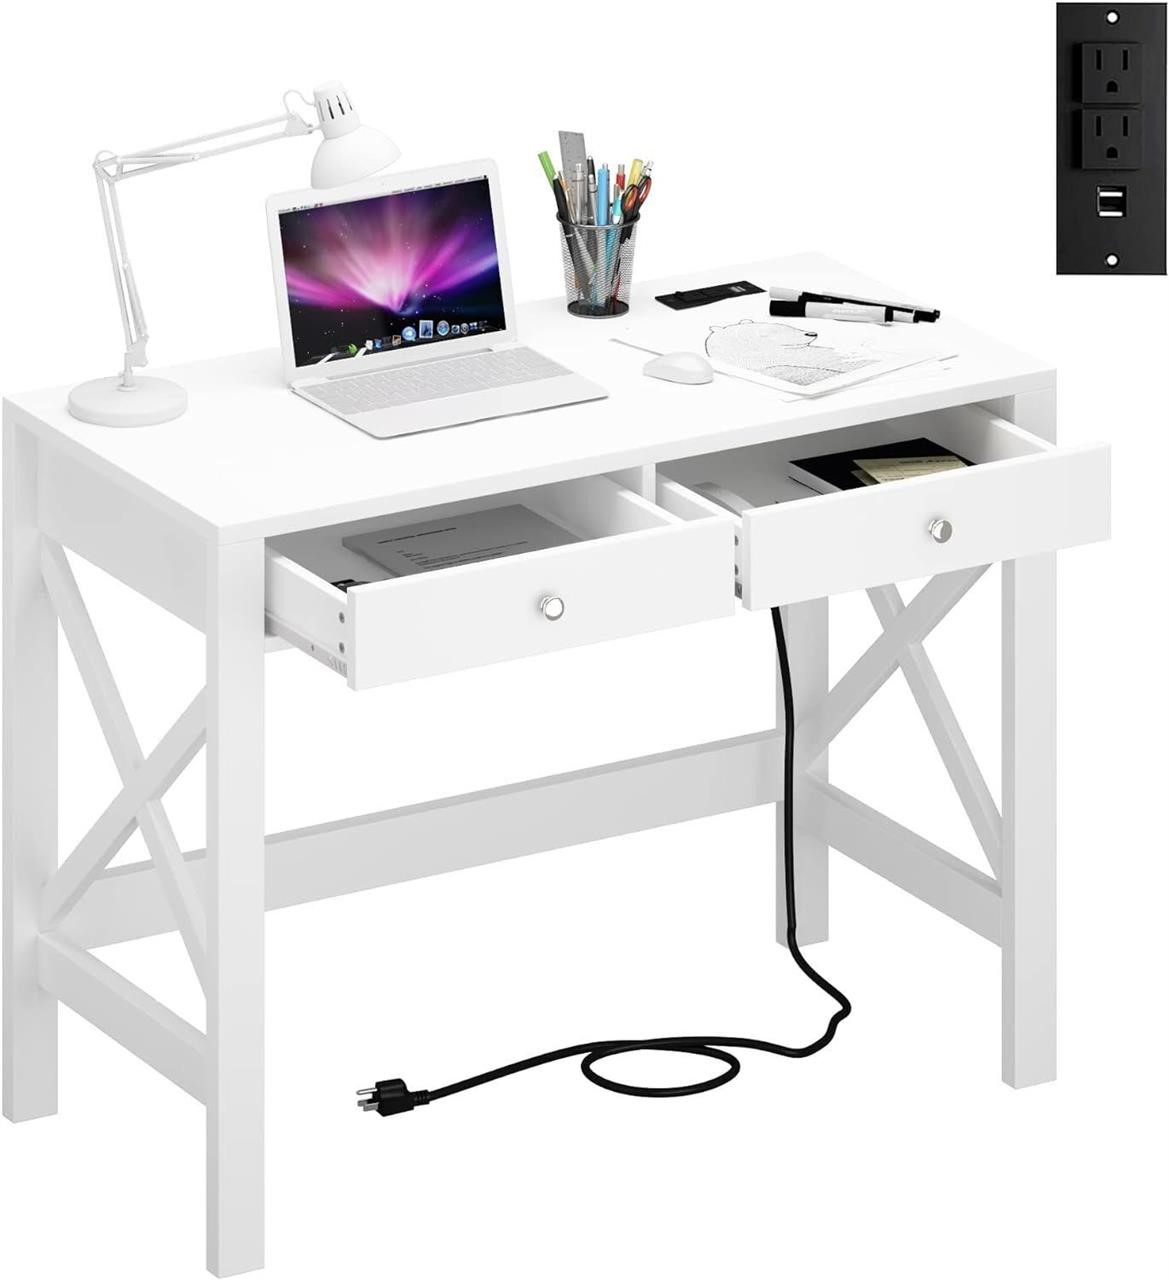 $159 - Computer Desk with USB Charging Ports